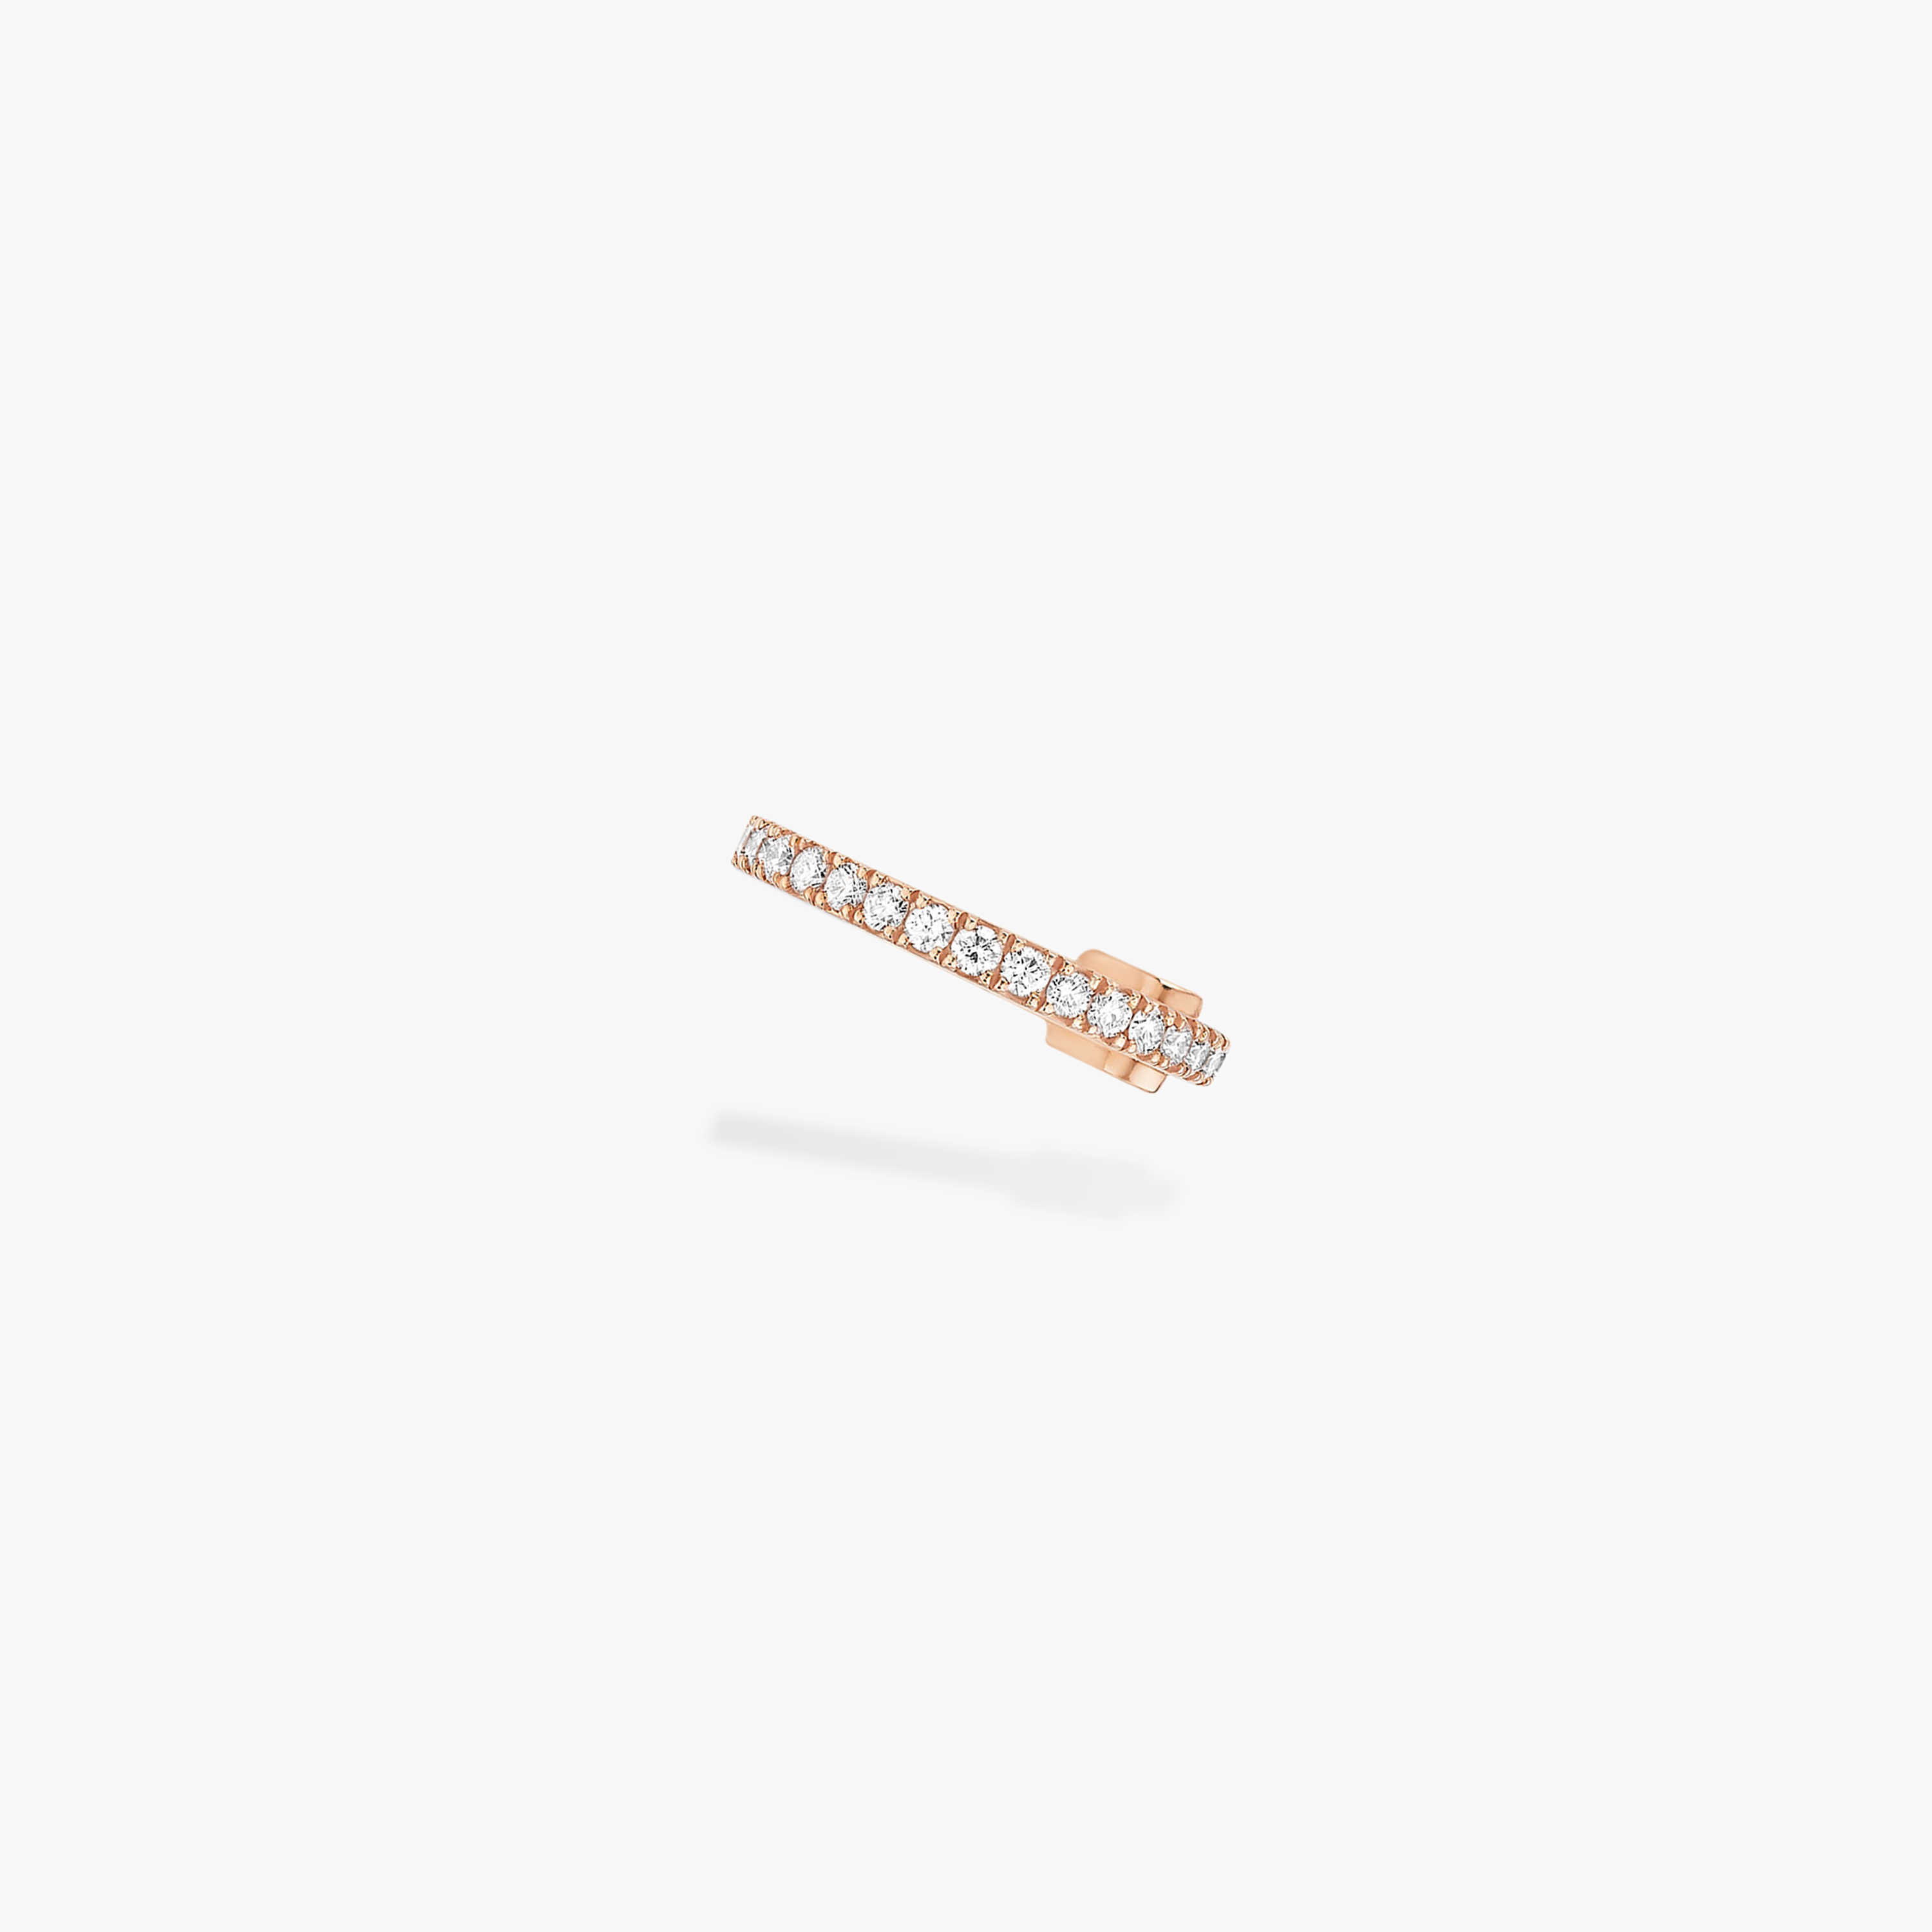 Gatsby Mono Clip Middle  Pink Gold For Her Diamond Earrings 10031-PG